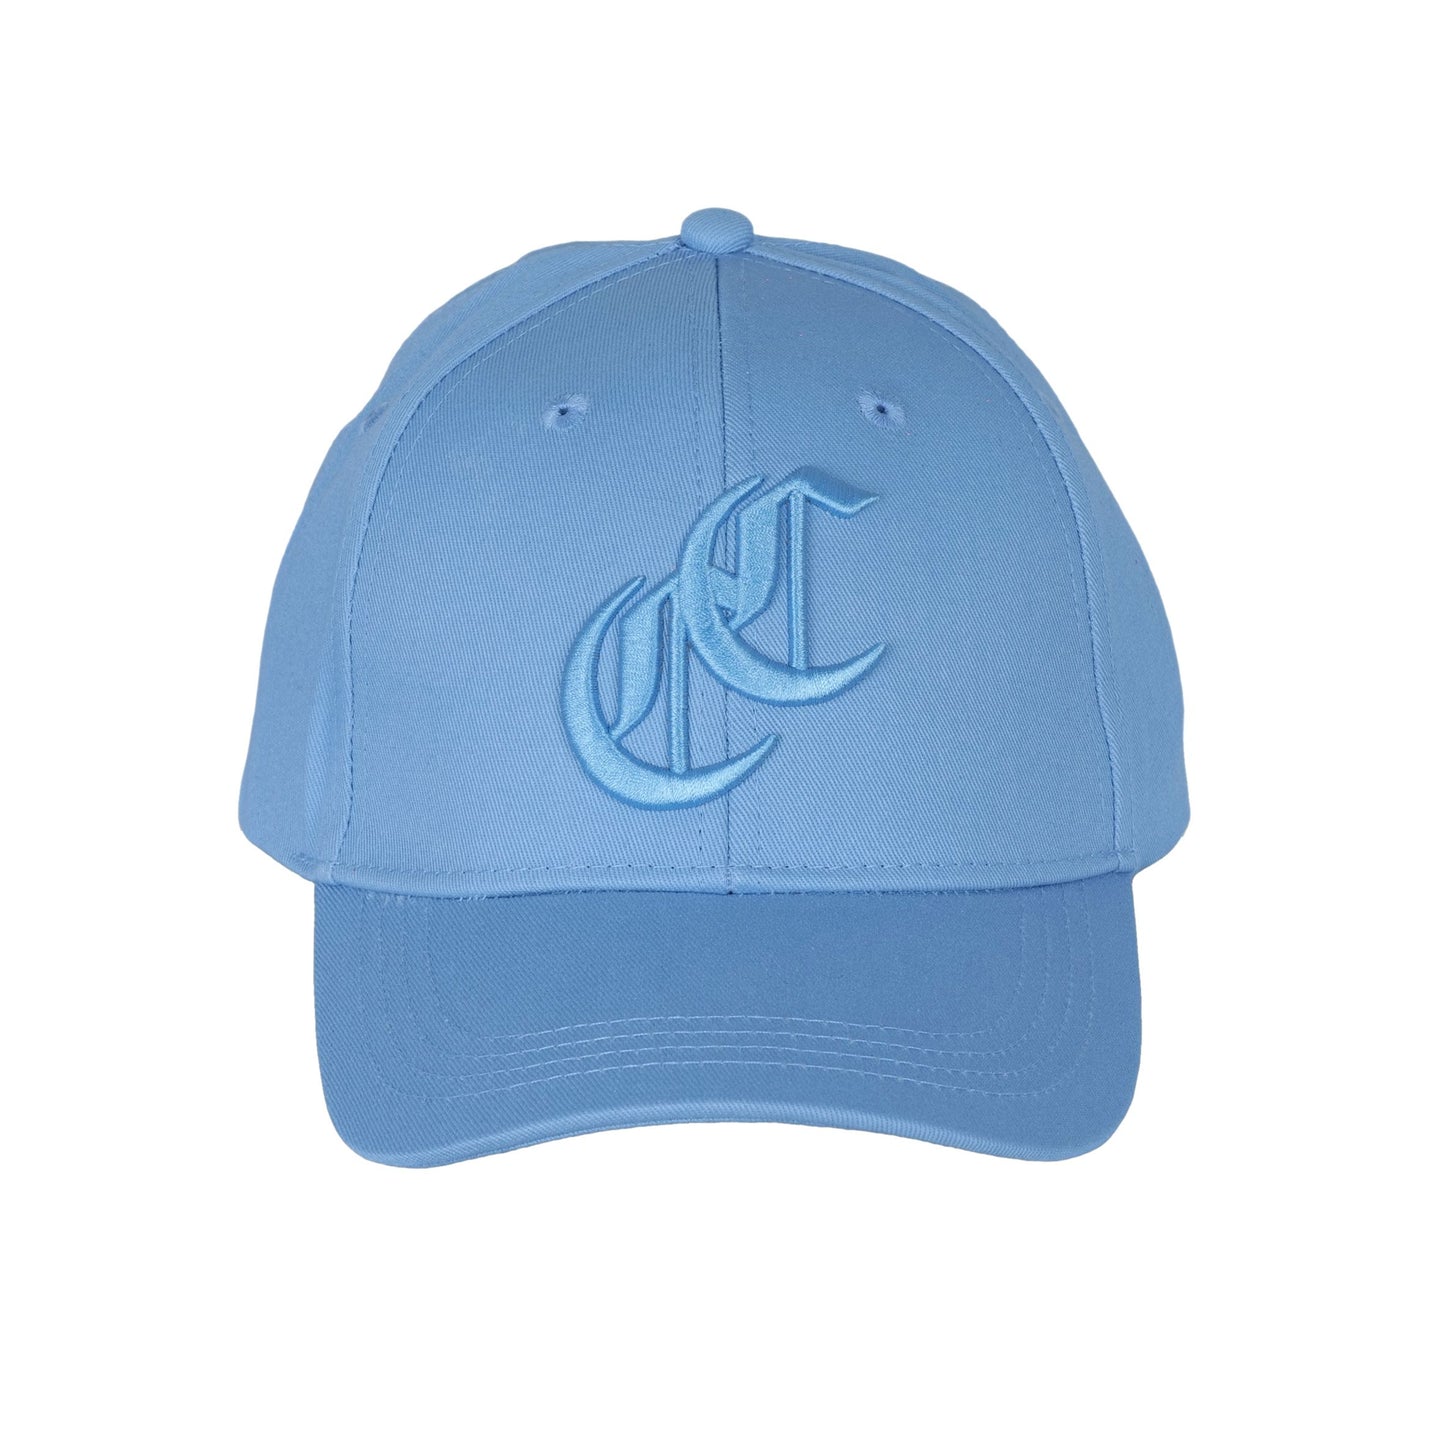 Load image into Gallery viewer, Burleigh Cap Sky Blue
